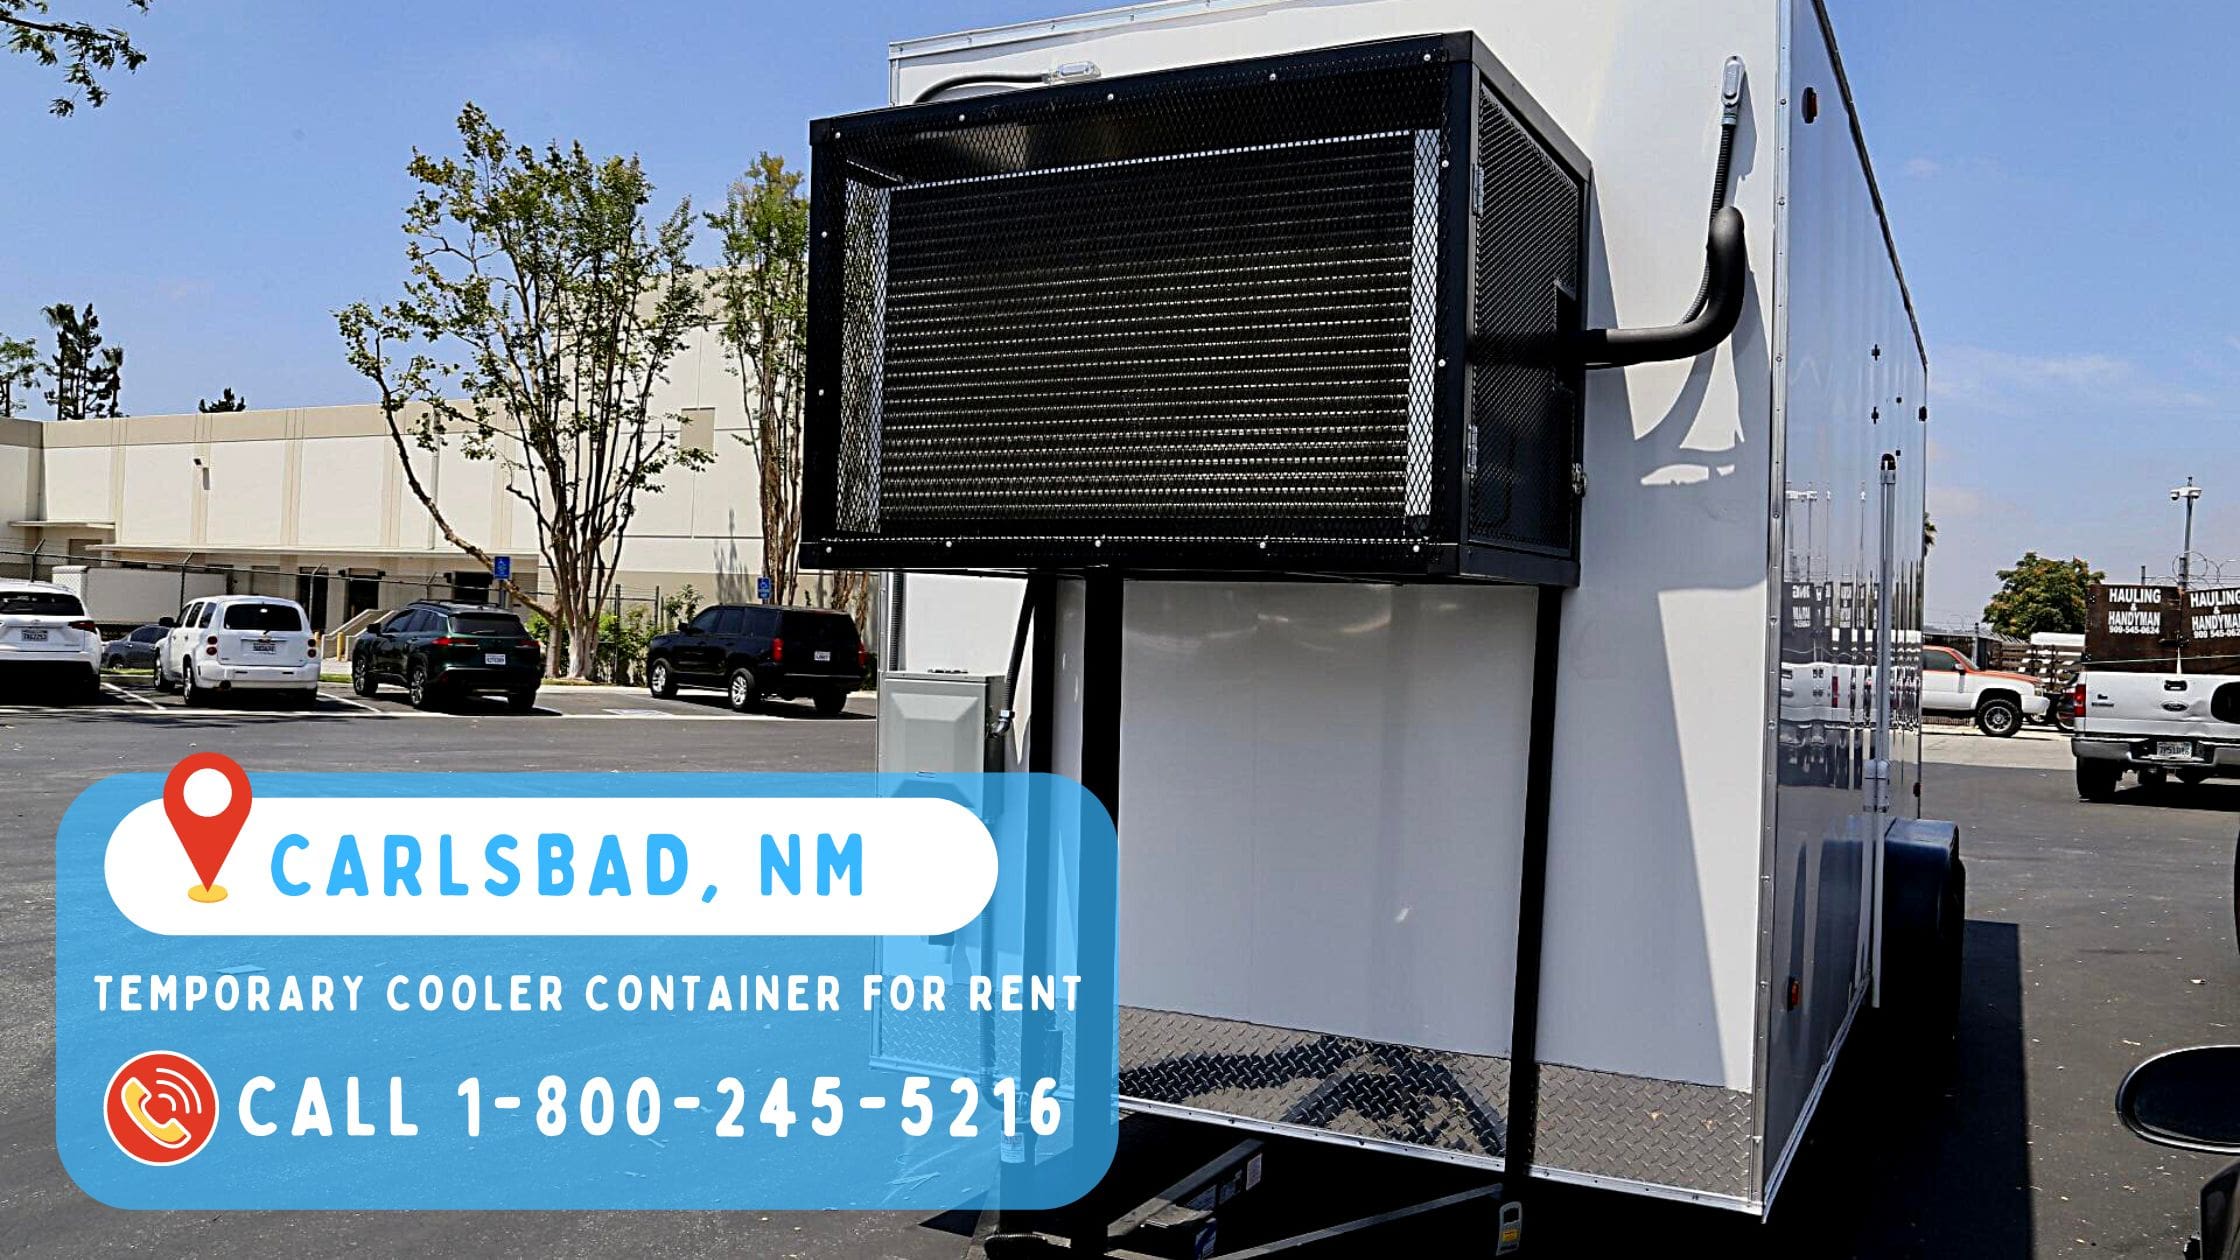 Temporary Cooler Container for Rent in Carlsbad